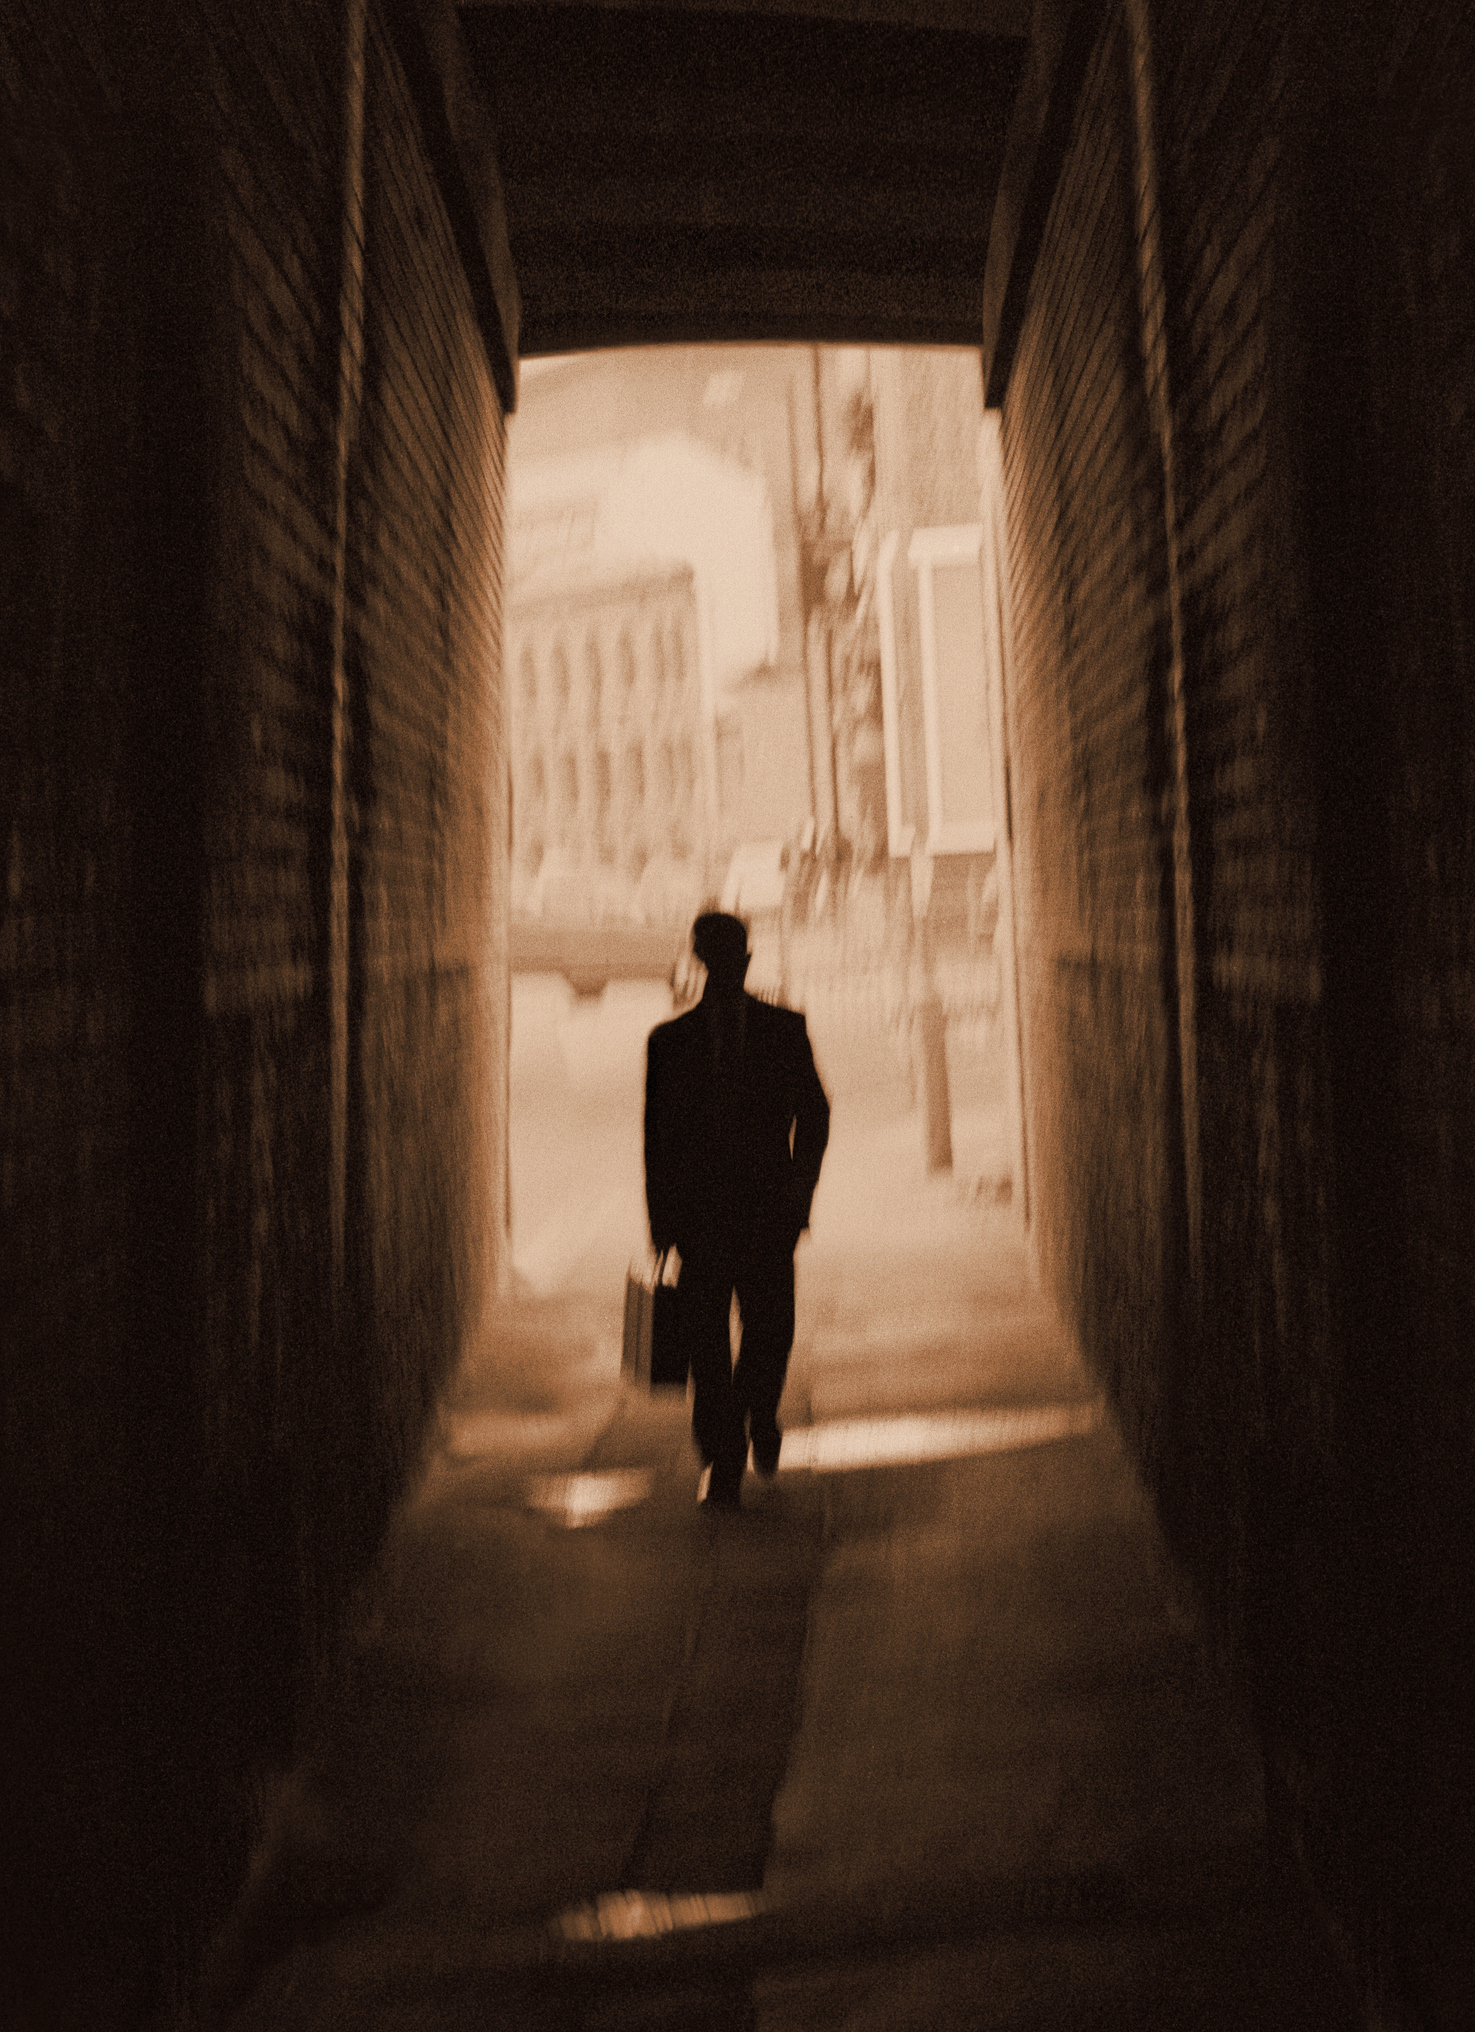 A person in a suit and pants and a briefcase walking down a narrow dark pathway